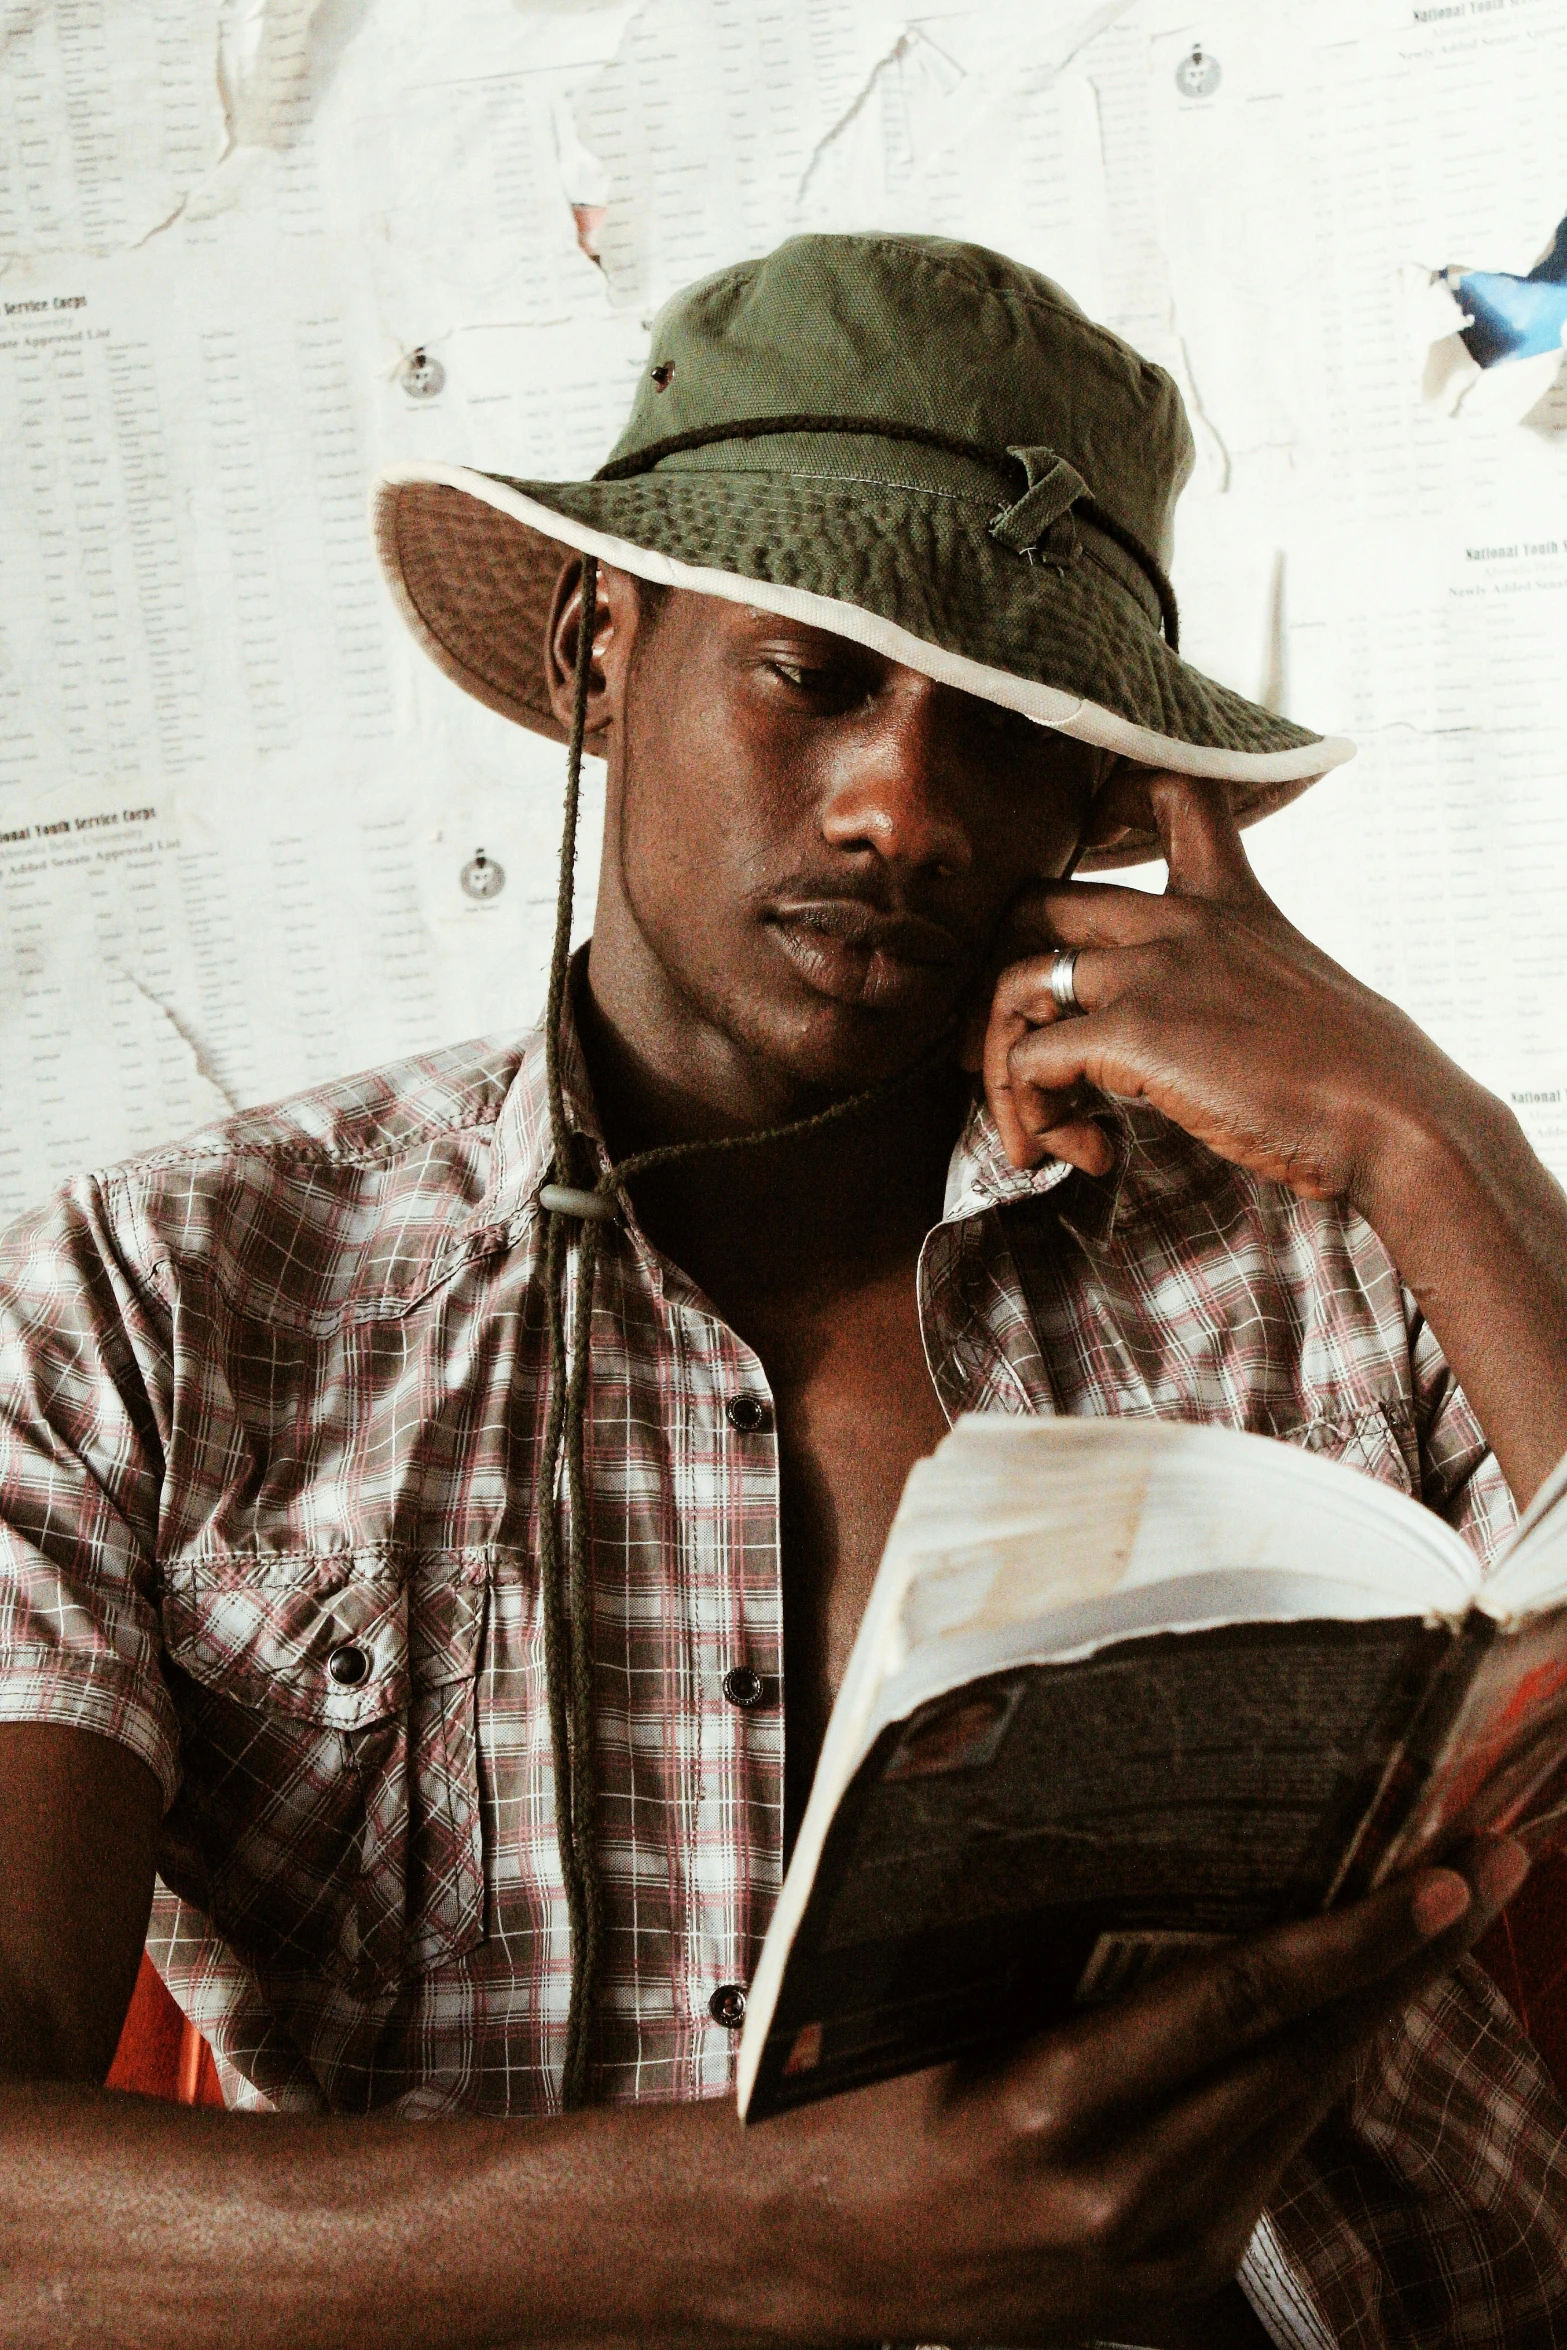 a man reading a book while wearing a hat, adut akech, '0 0 s nostalgia, rugged, trending photo